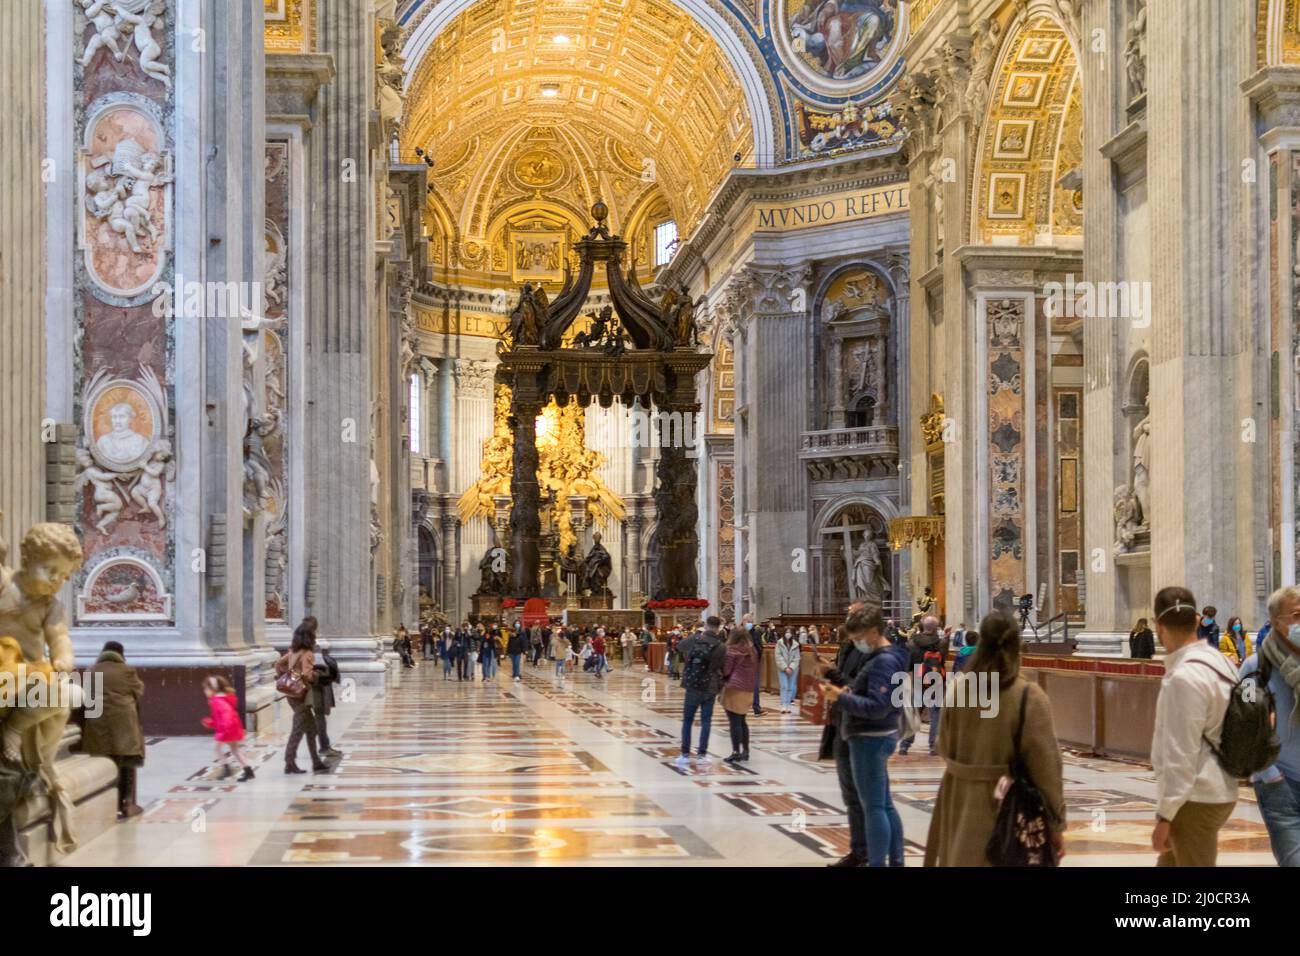 The impressive structure of the inside of St. Peter's Basilica, Vatican, Italy Stock Photo